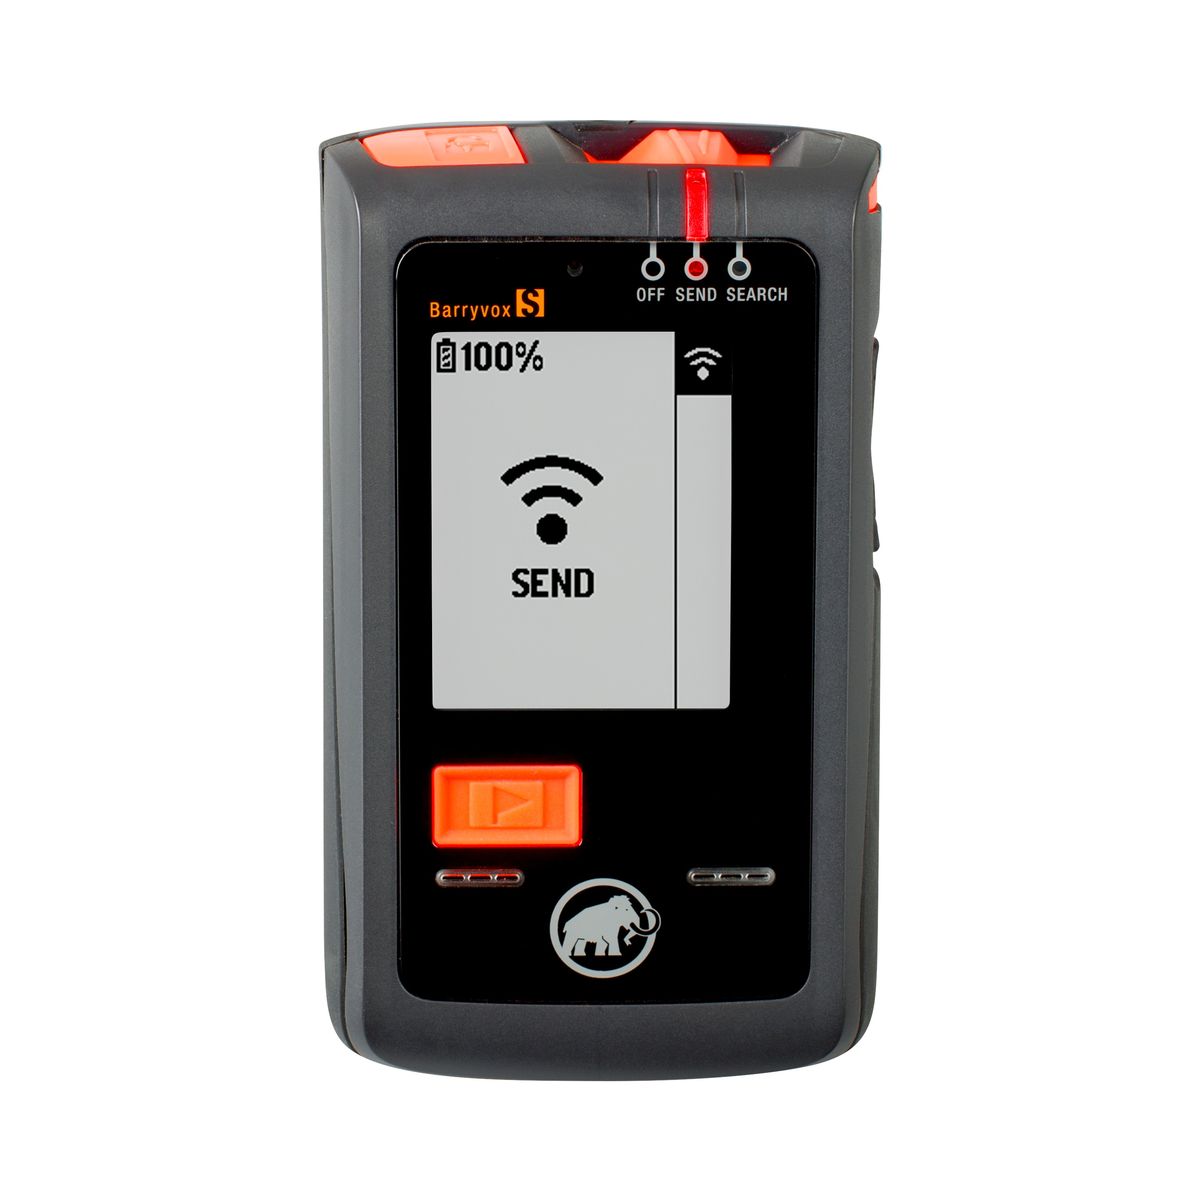 Mammut Barryvox S Transceiver (Non-Current)